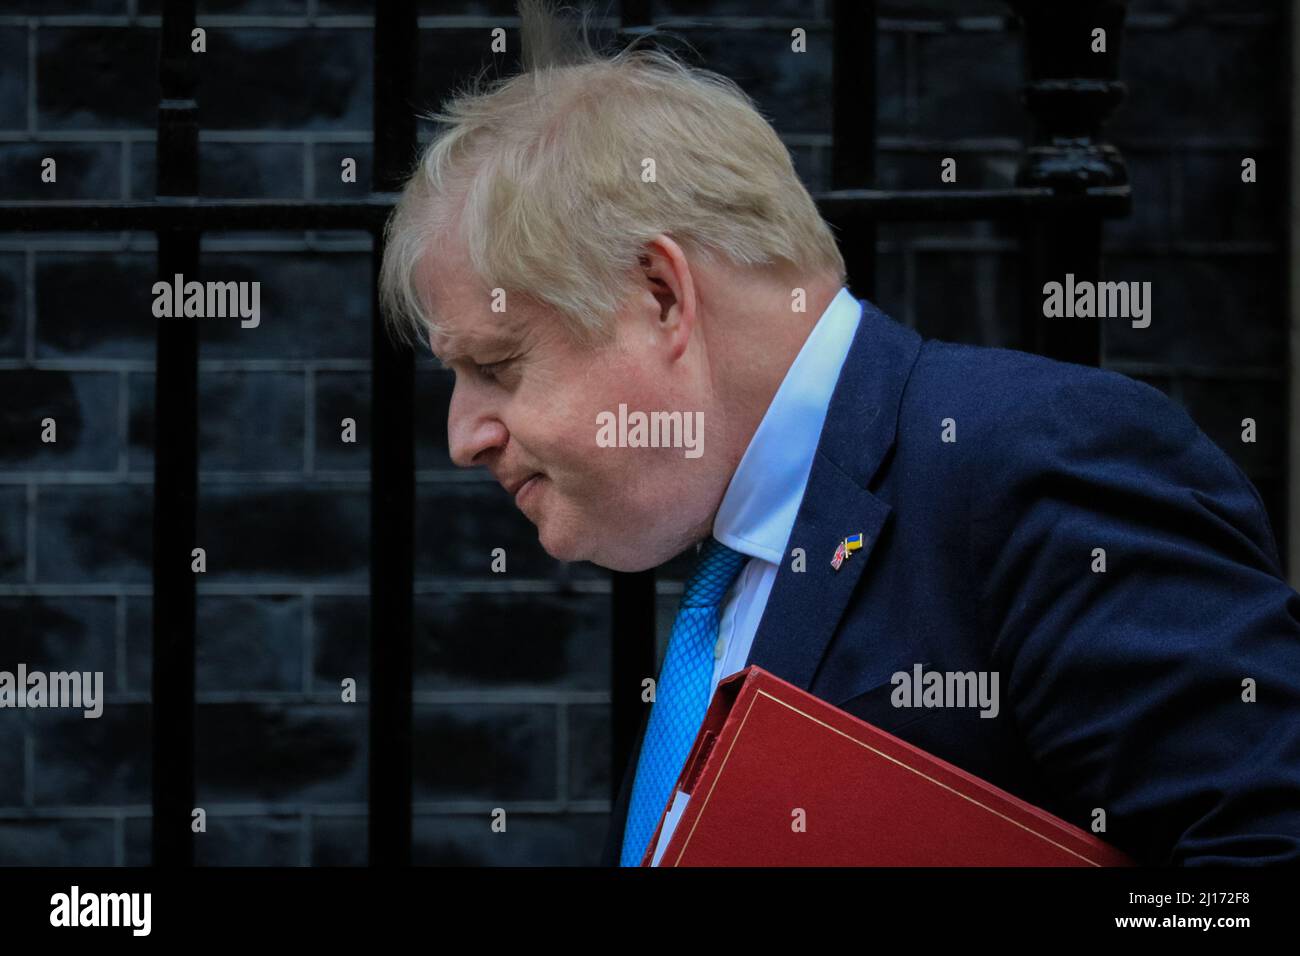 Westminster, London, UK. 23rd Mar, 2022. Boris Johnson MP, British Prime Minister, exits 10 Downing Street for PMQs at Parliament today. Credit: Imageplotter/Alamy Live News Stock Photo